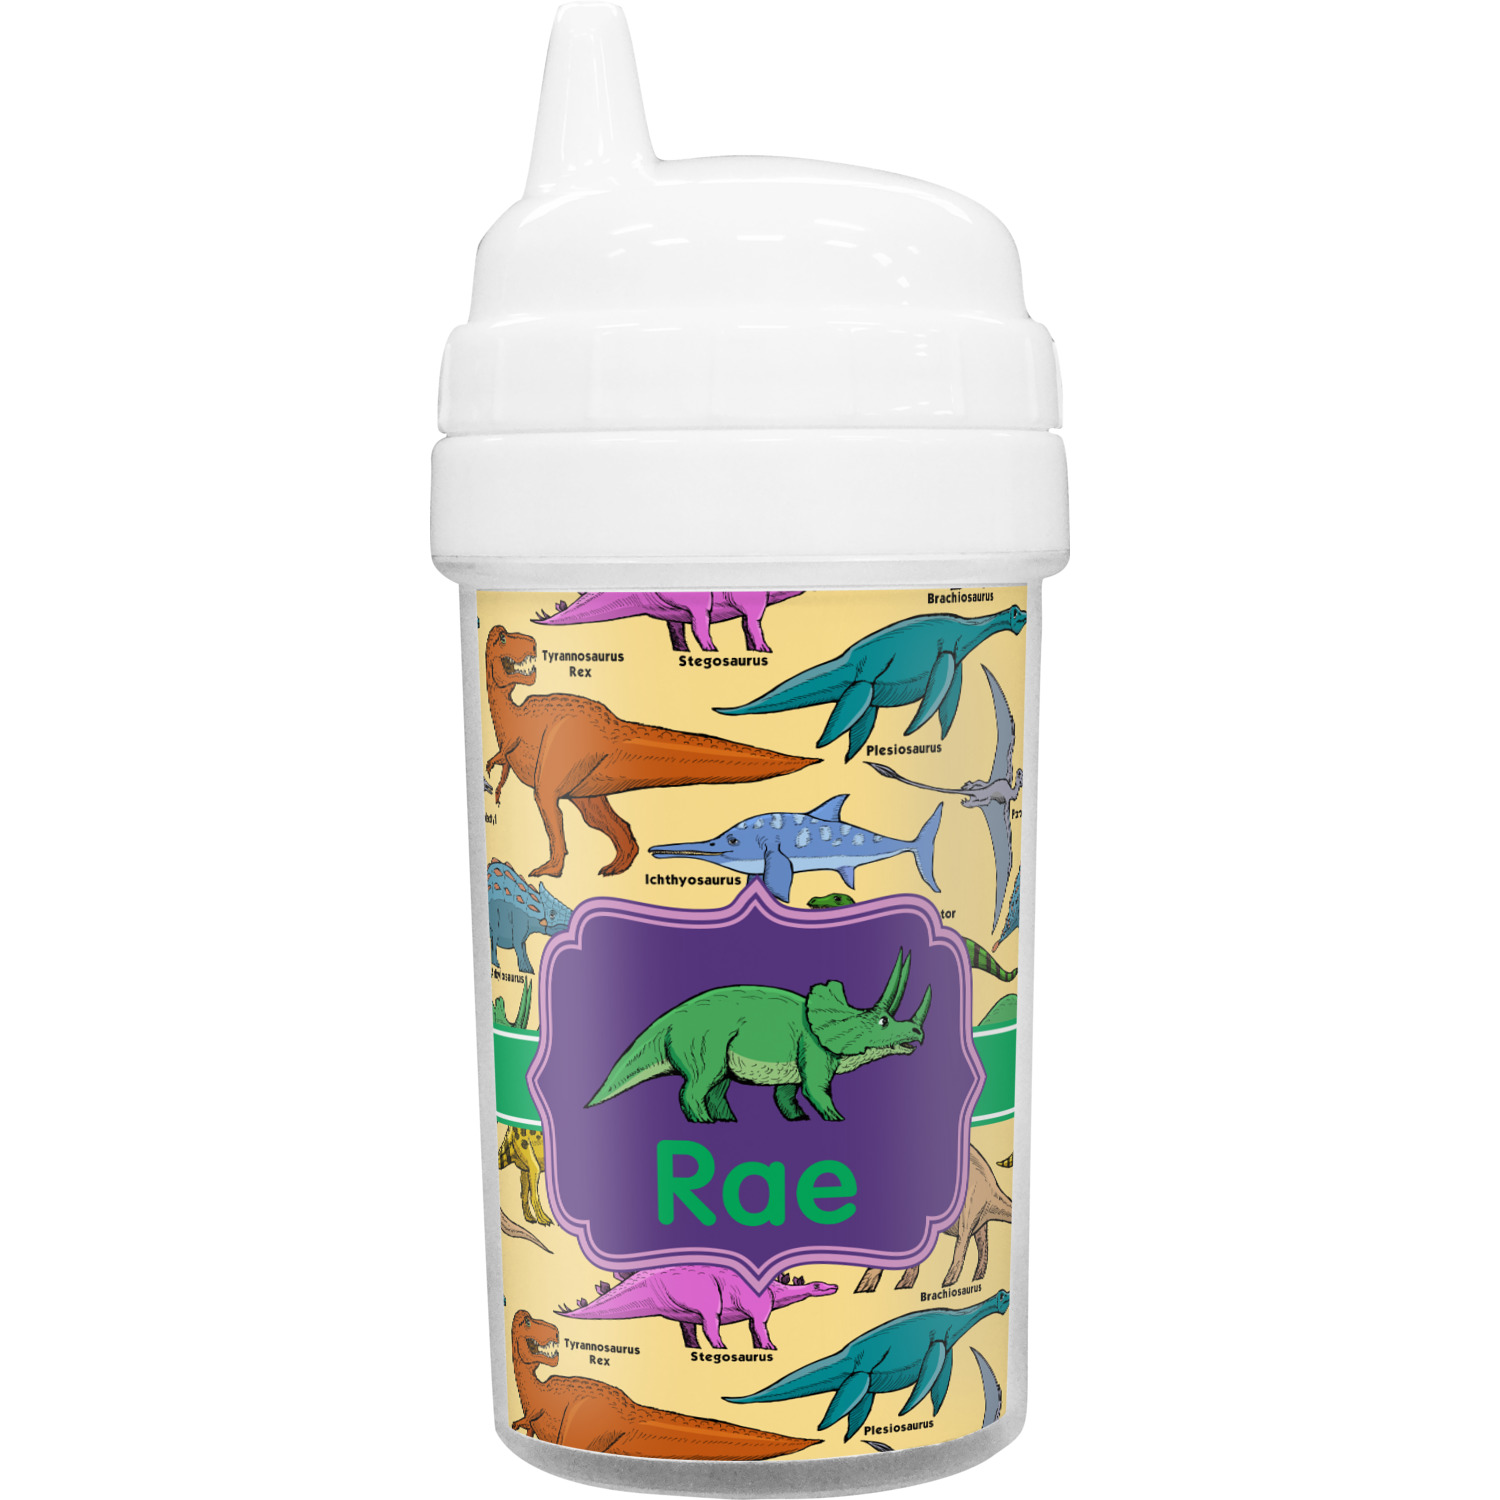 Honeybee, Flip Top, Sippy Cup, Spill Proof, Personalized, Kids